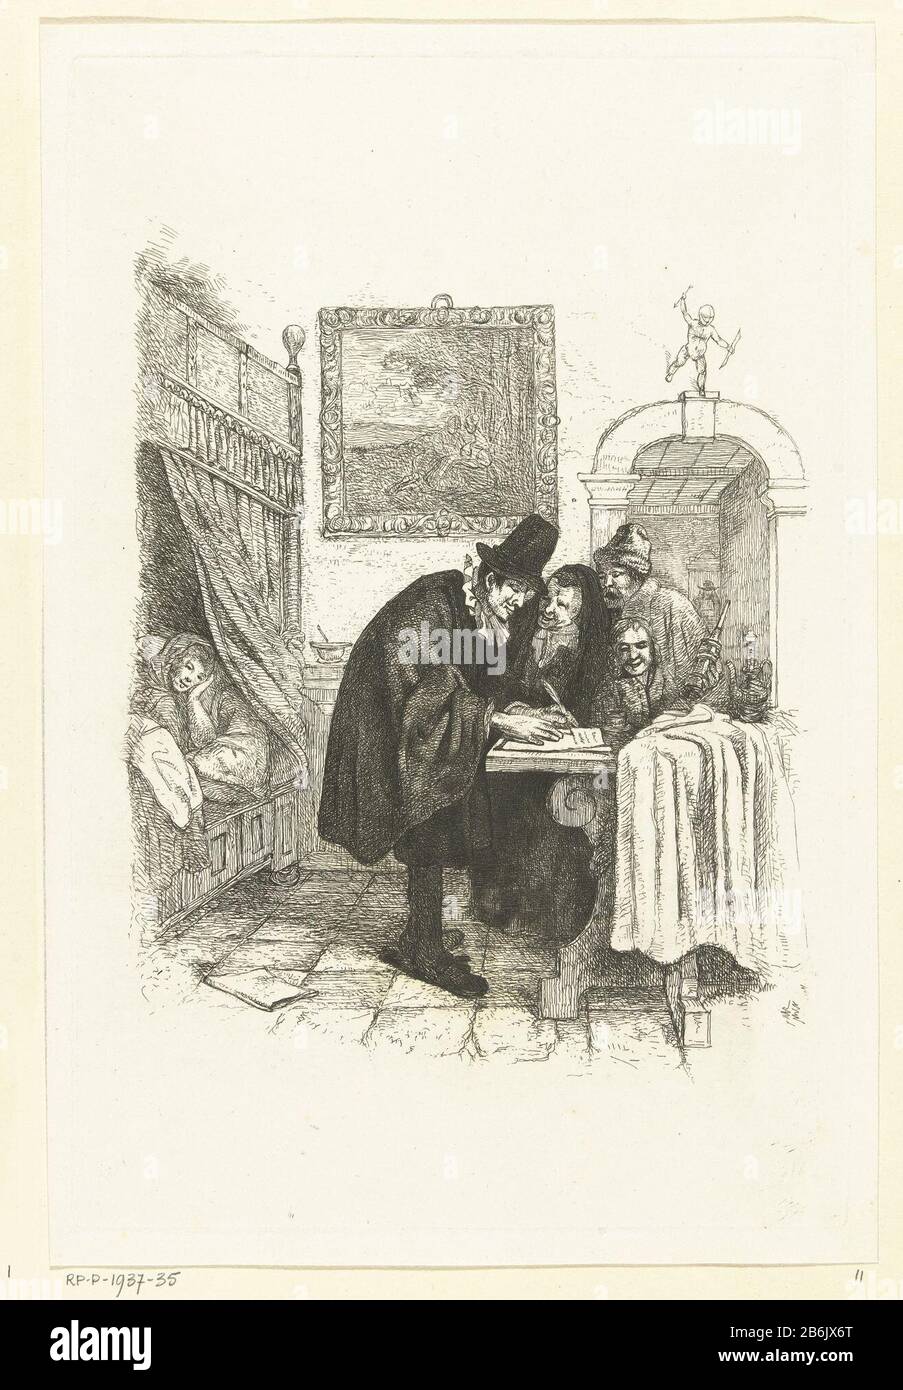 Doctor house calls to sick woman a doctor writes a prescription standing on a table. An old woman, a man with an enema and a boy watch. The patient, a sick woman lying in bed. In the interior there is a painting on the wall with a pastoral scene. On top of the arch is a small statue of Amor. Manufacturer : printmaker Albertus Brondgeestnaar painting by Jan Havicksz. Steenplaats manufacture: Netherlands Date: 1796 - 1849 Physical features: etching material: paper Technique: etching Dimensions: plate edge: H 249 mm × W 164 mmToelichtingPrent to painting by Jan Steen. Subject: sick bedphysician, Stock Photo